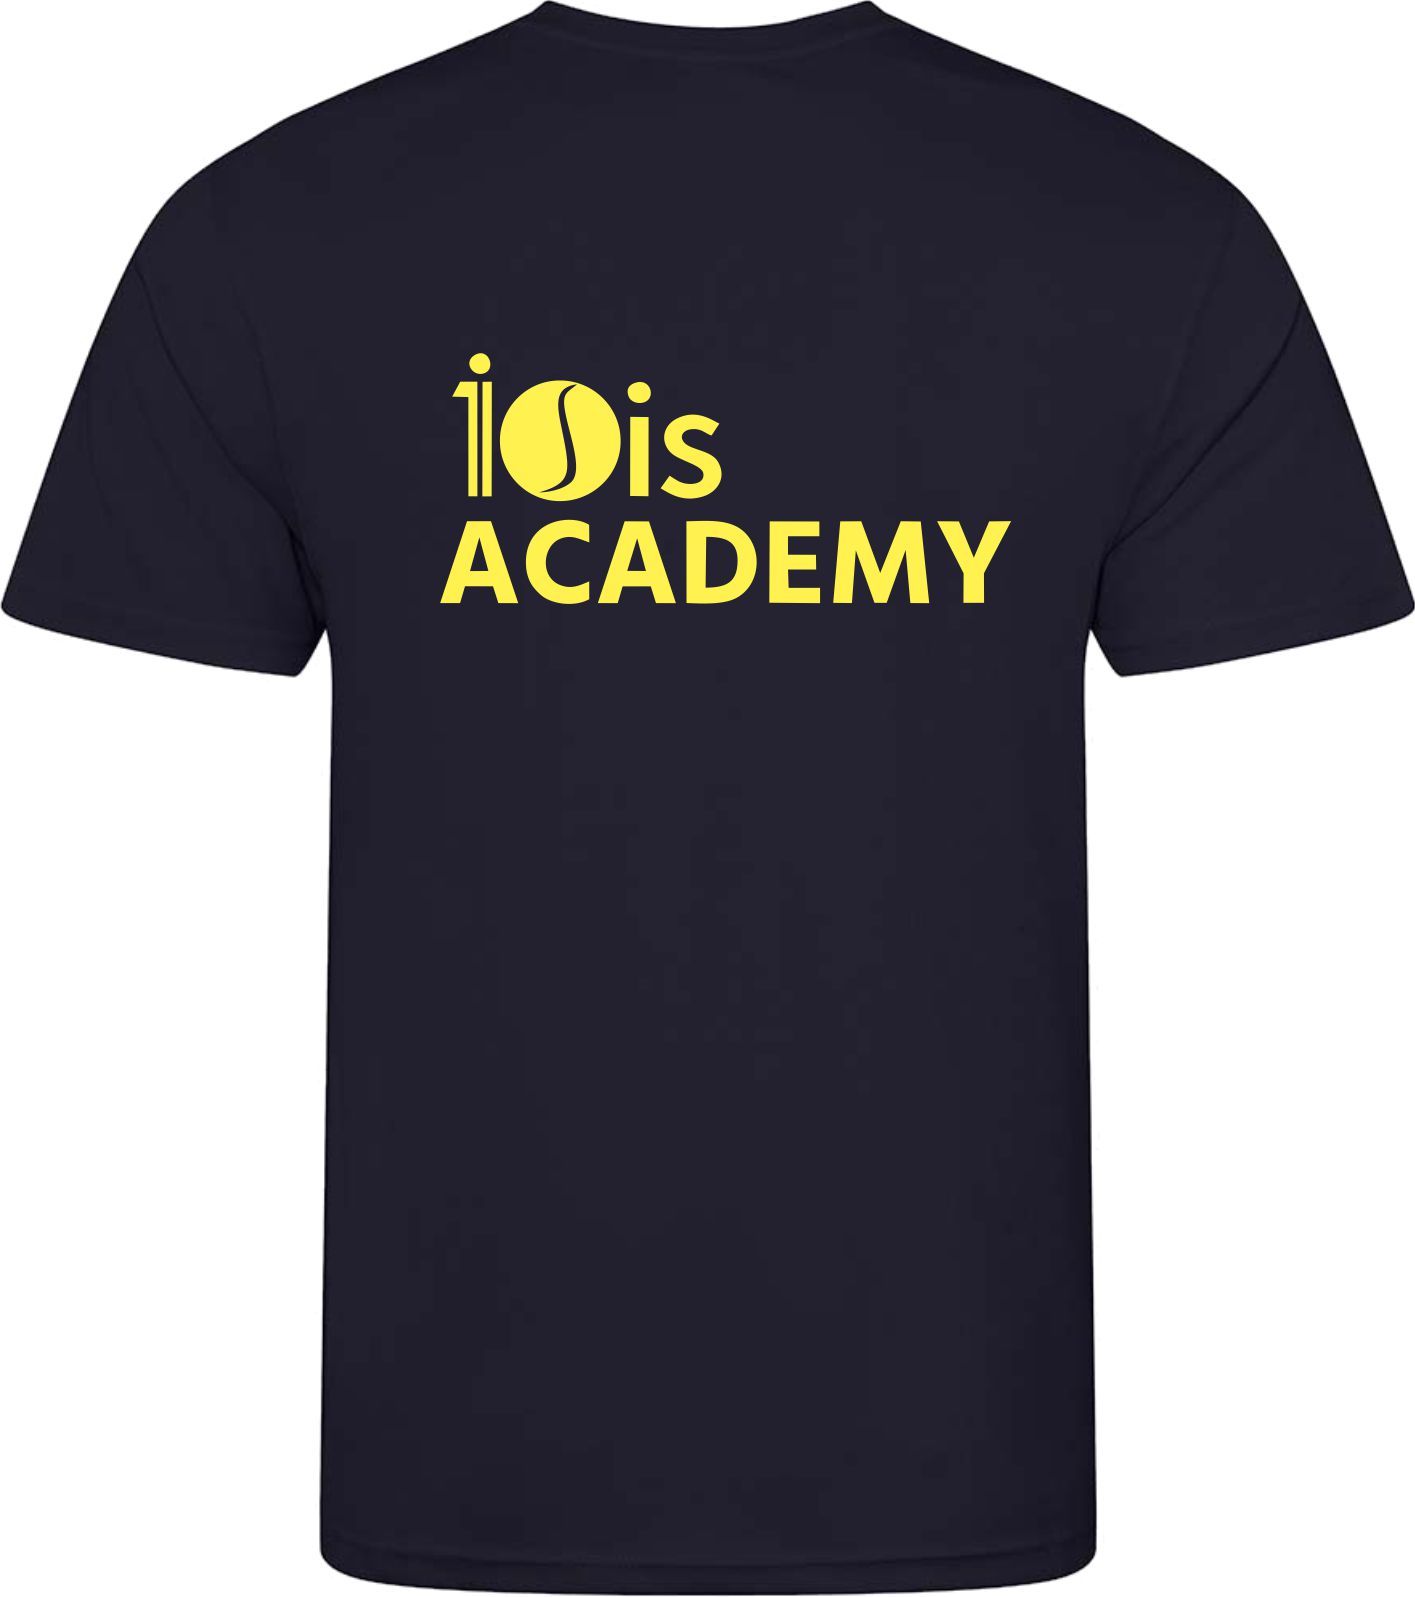 10is Academy Short Sleeve Cool T (Unisex)